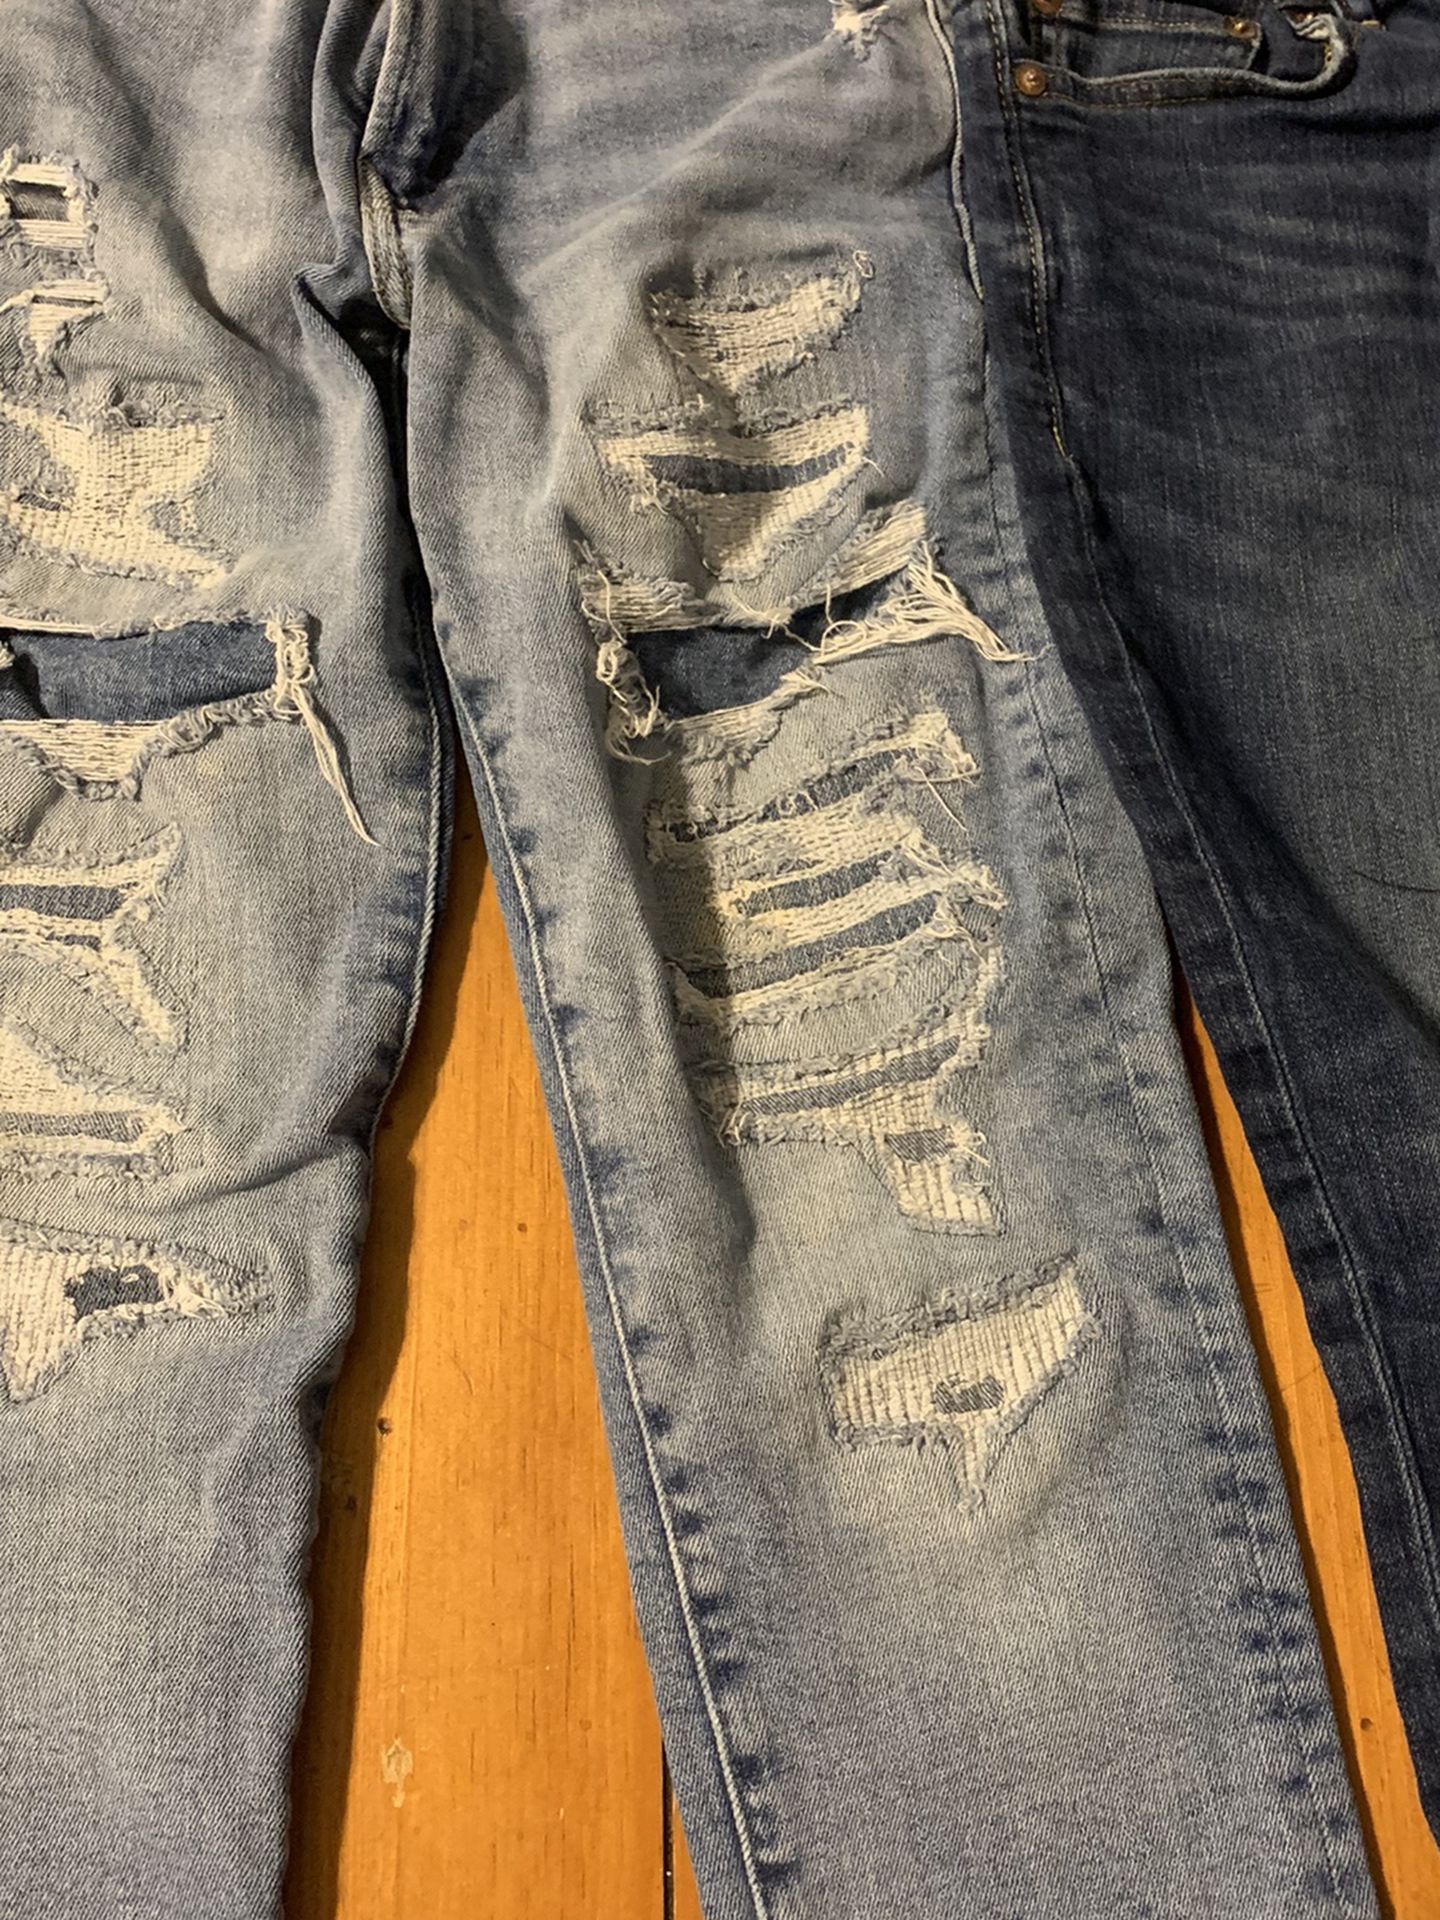 2 Pair Boys American Eagle Jeans! 2 Pair True Craft. Size 26-29.